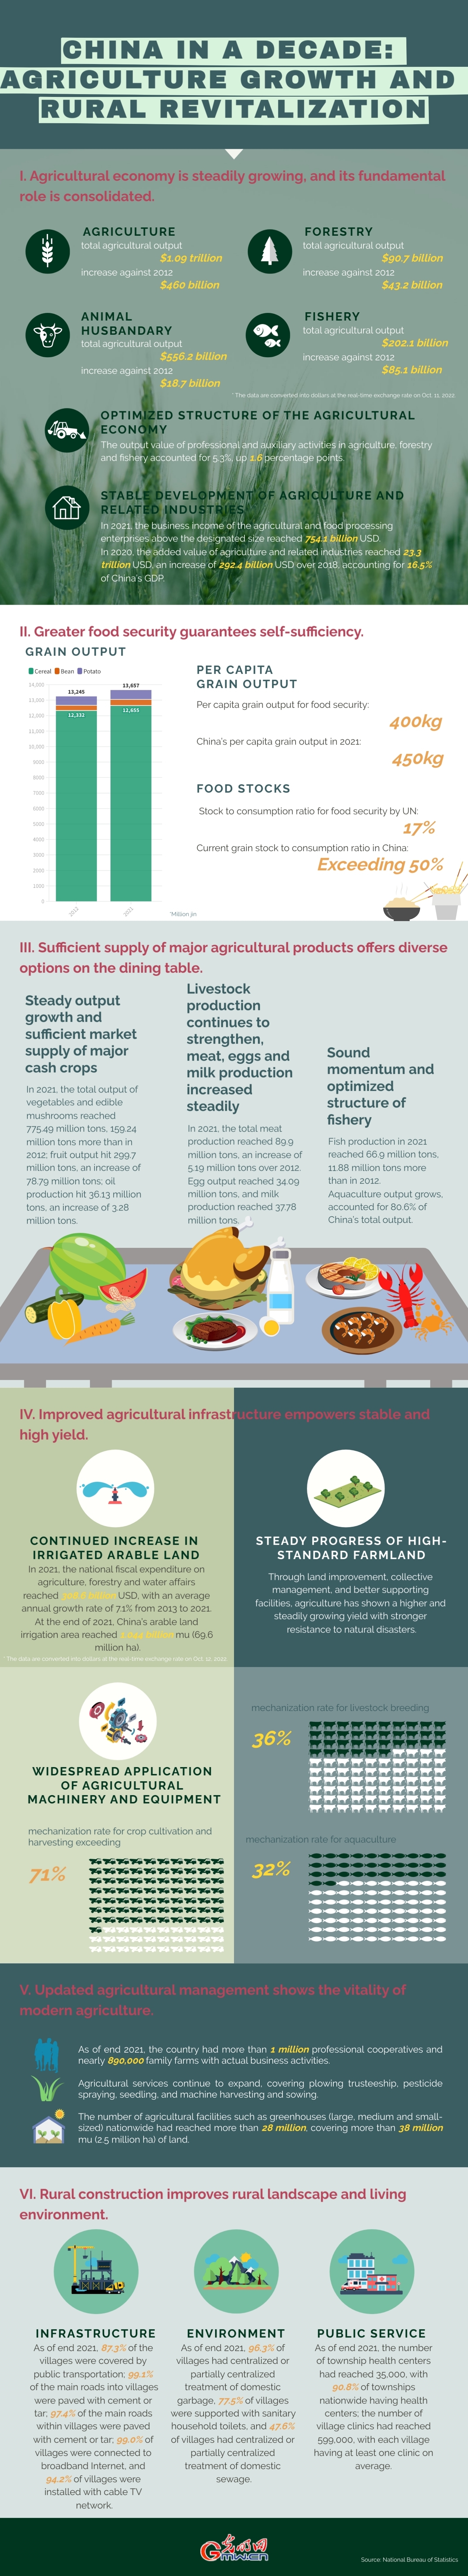 China in a Decade: Agriculture Growth and Rural Revitalization